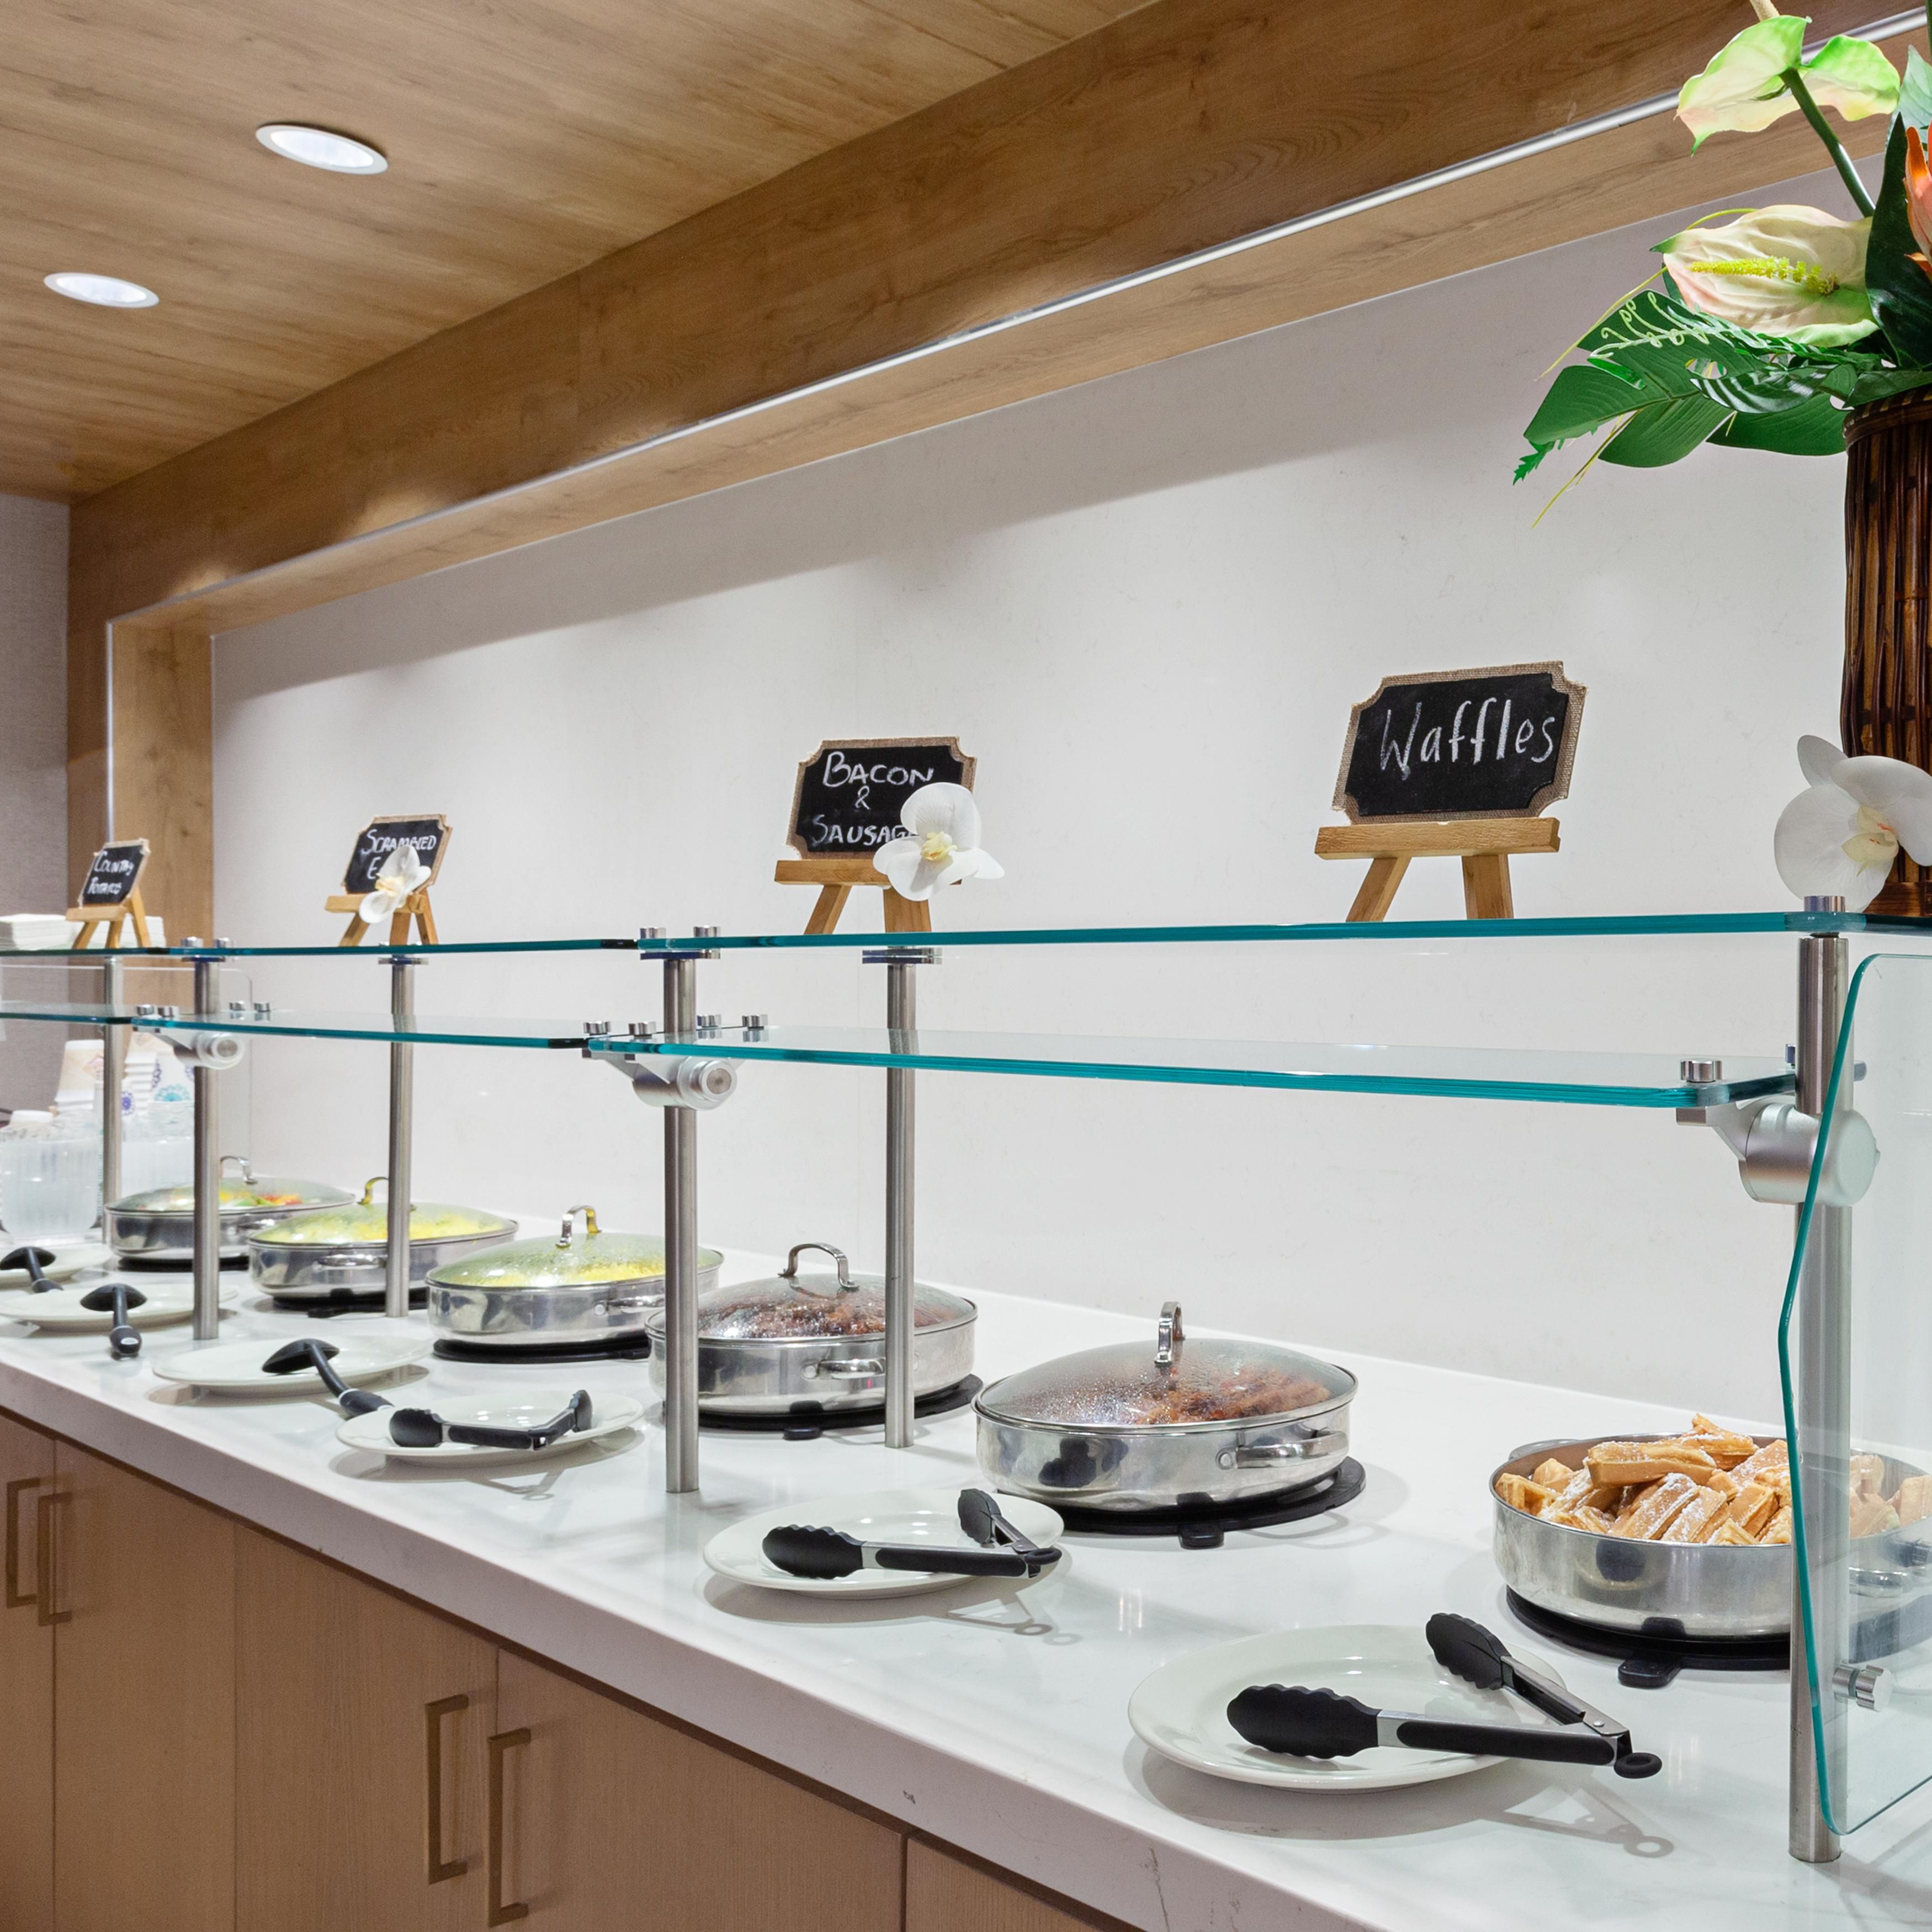 Breakfast bar with many delicious options.